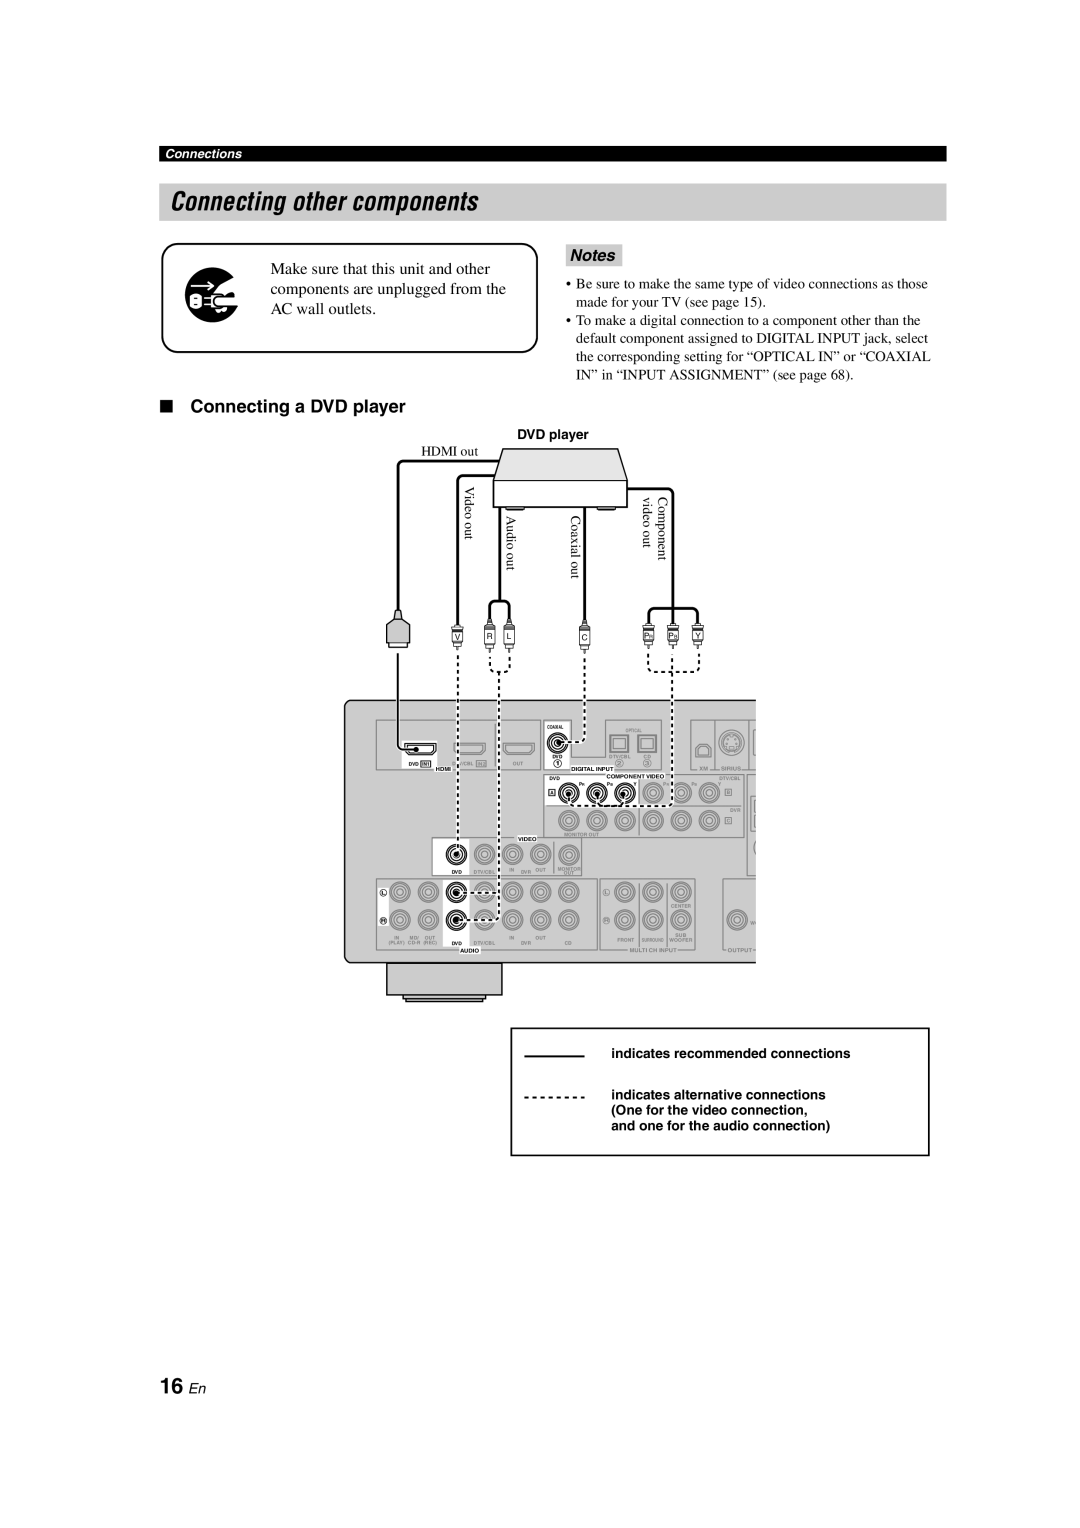 Yamaha HTR-6140 owner manual Connecting other components, 16 En, Connecting a DVD player, Notes, Connections 